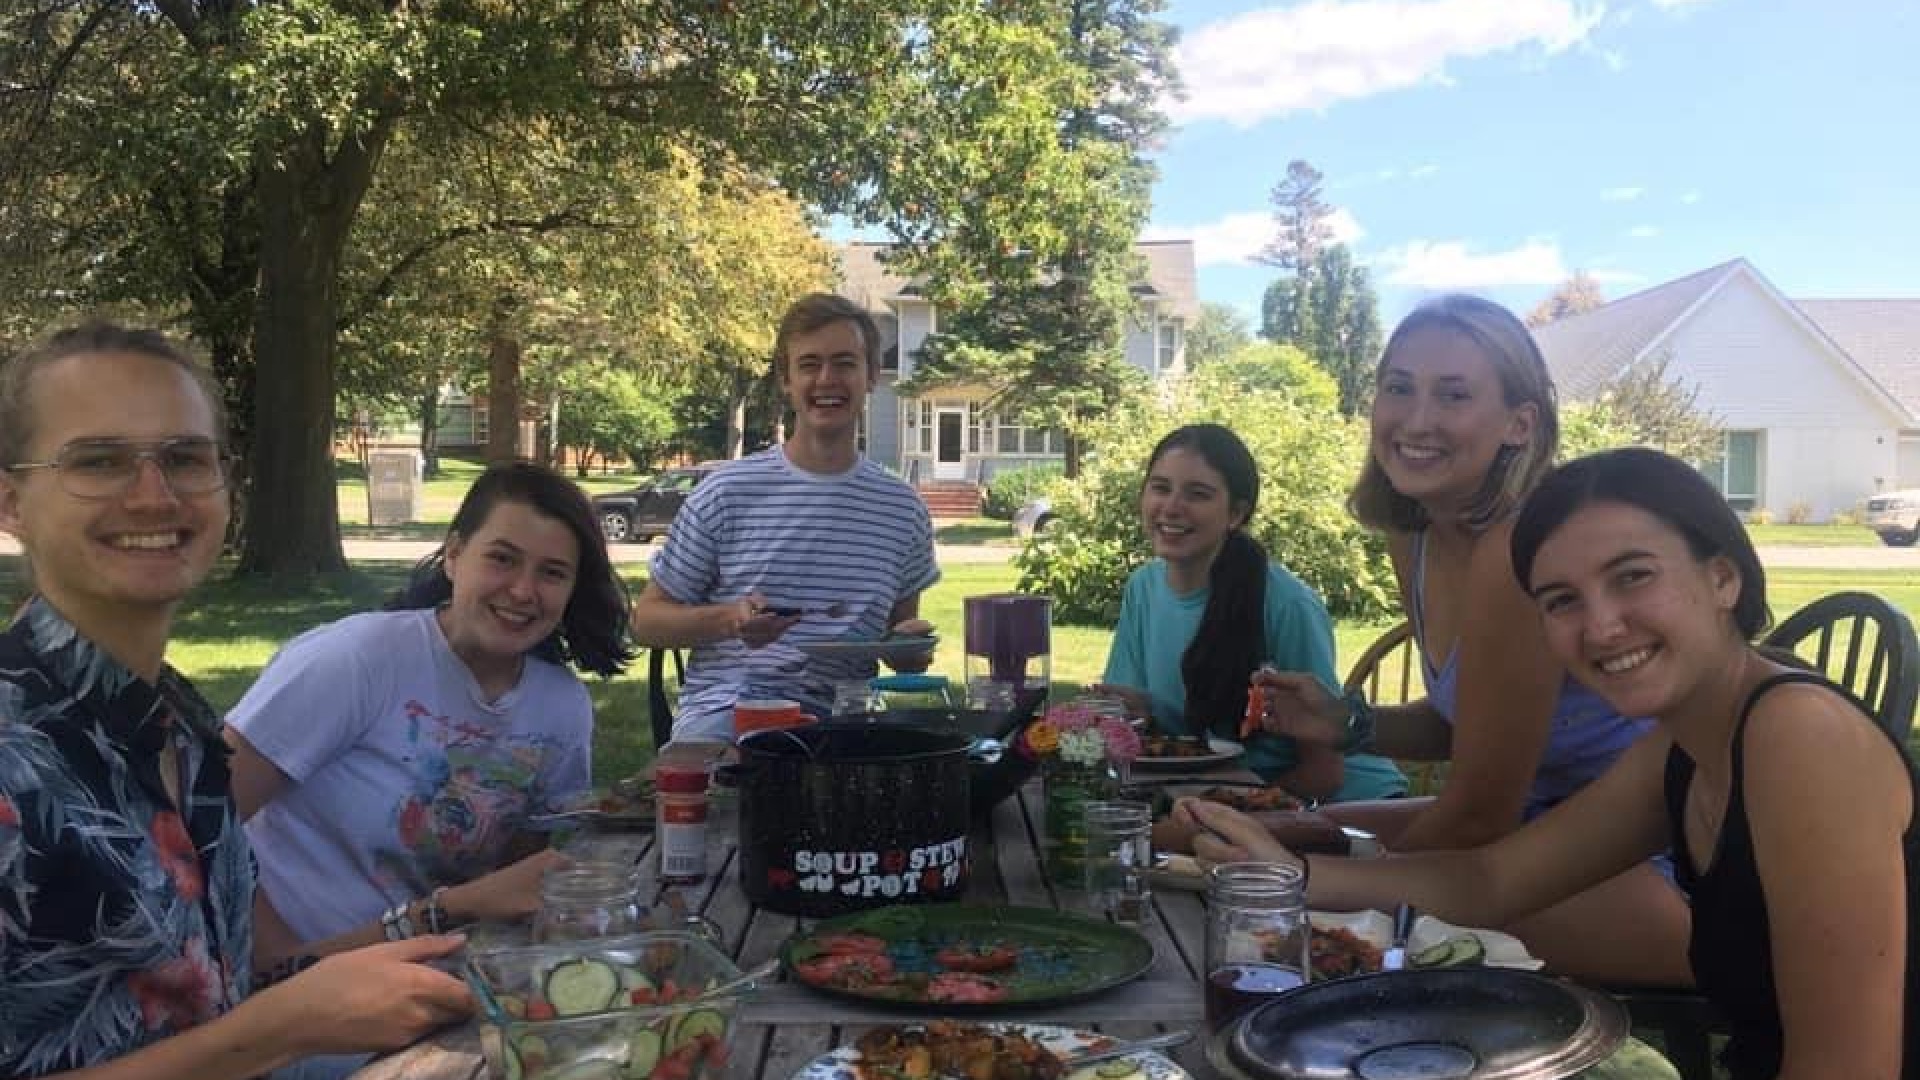 Students around a picnic table eating, large pot that says soup and stew pot in center of table